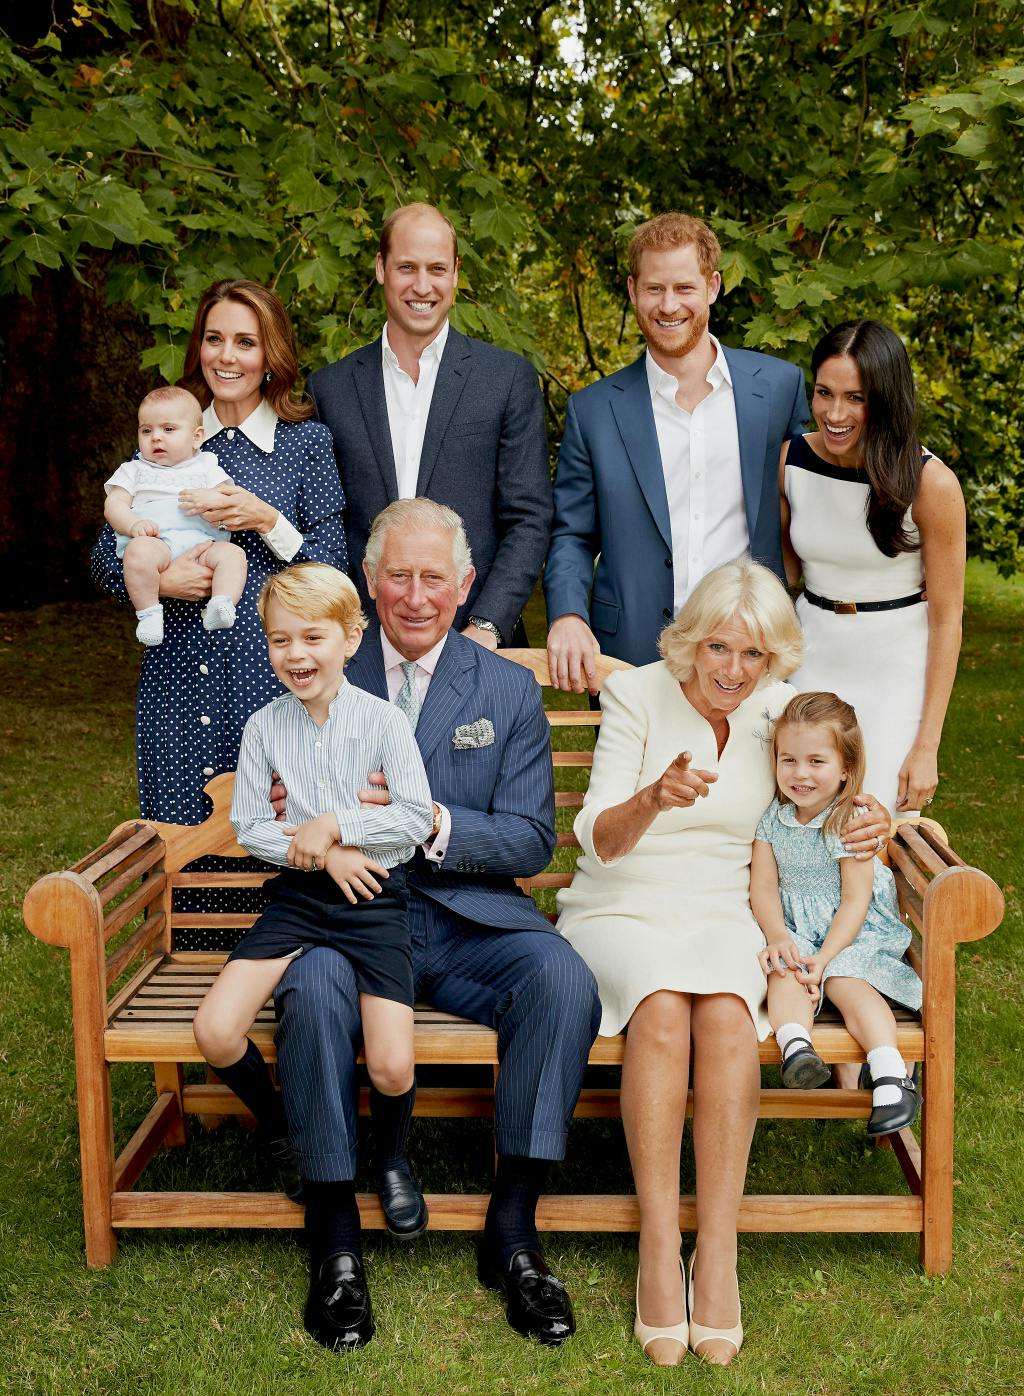 HRH Prince Charles, Prince of Wales poses for an official portrait to mark his 70th Birthday in the gardens of Clarence House, with Their Royal Highnesses Camilla Duchess of Cornwall, Prince Willliam Duke of Cambridge, Catherine Duchess of Cambridge, Prince George, Princess Charlotte, Prince Louis, Prince Harry Duke of Sussex and Meghan Duchess of Sussex, on September 5, 2018. The family grouping looks relaxed and smiling.